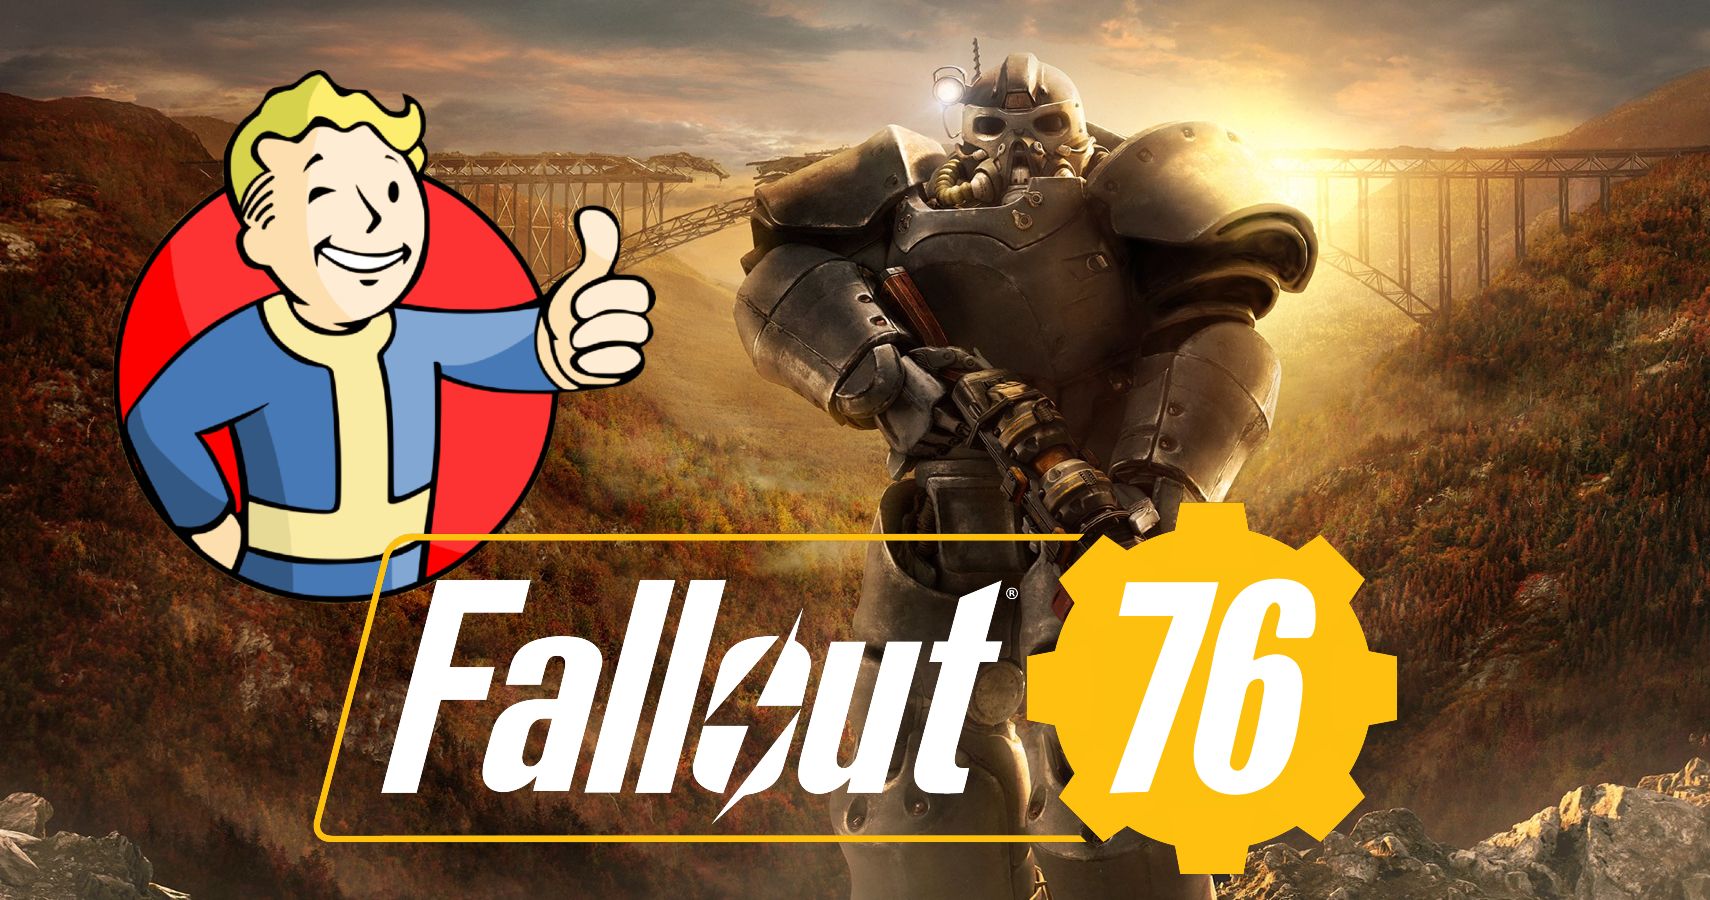 most fun fallout 76 builds